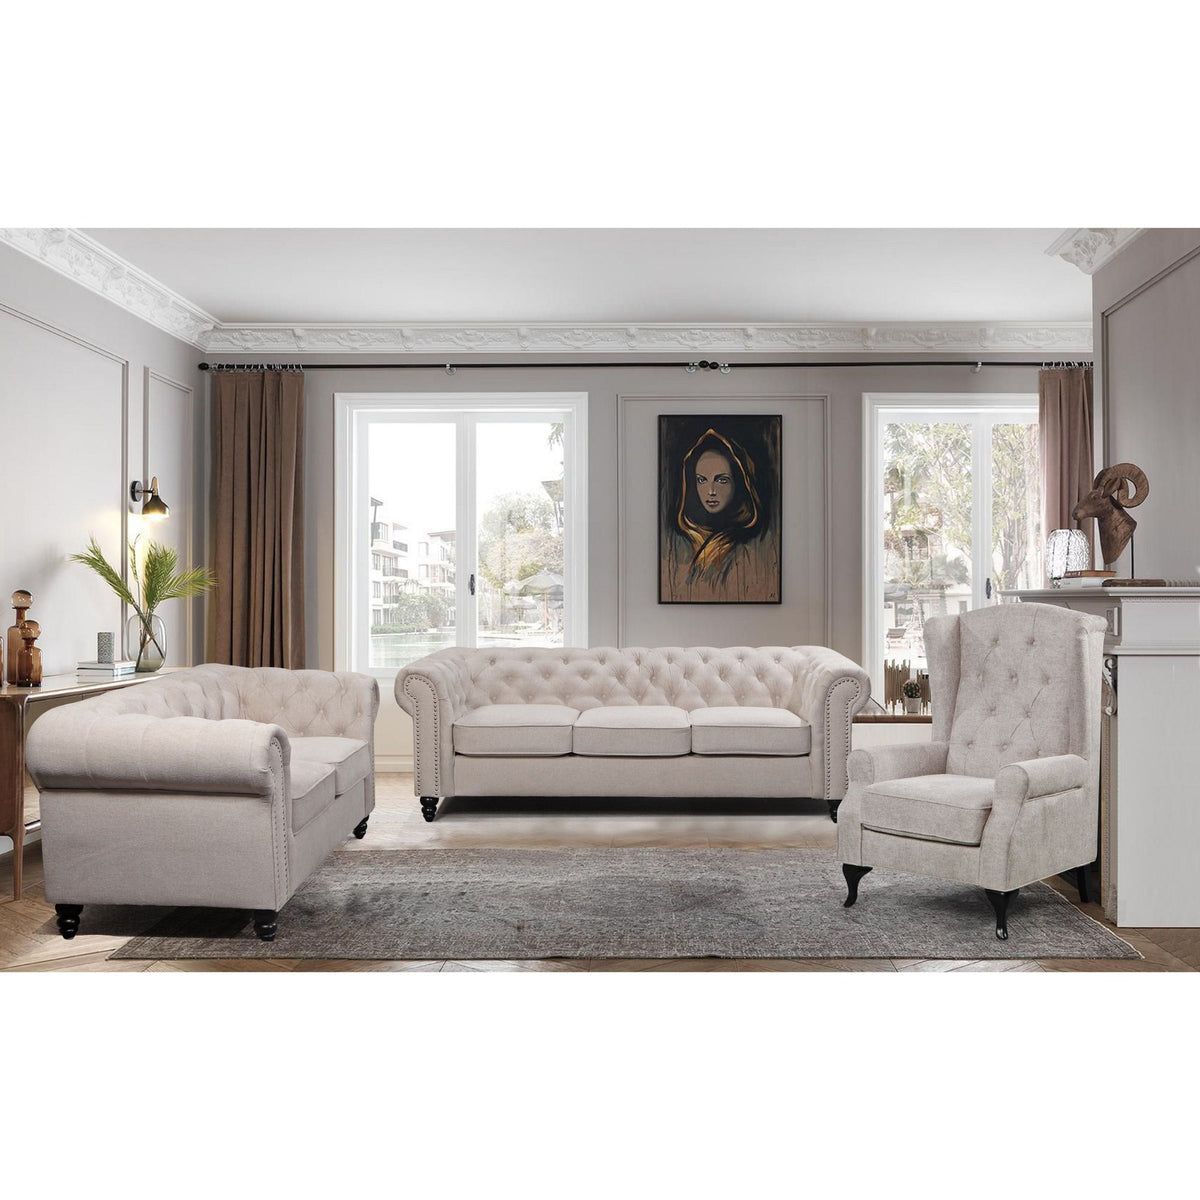 Kiho Chesterfield Fabric Upholstered 3 Seater Sofa  - Beige - Notbrand